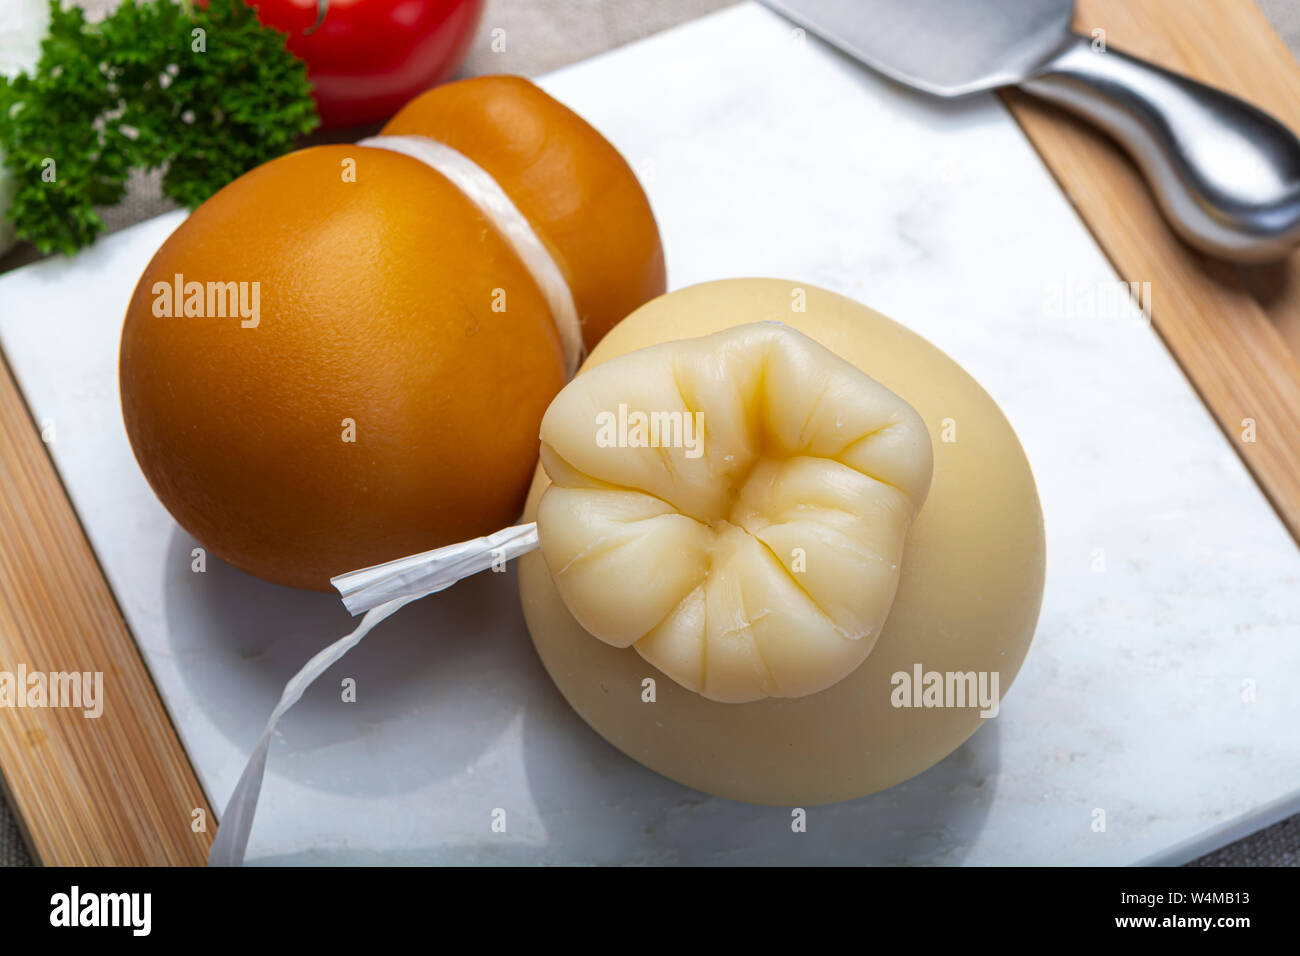 Cheese collection, Italian provolone or provola caciocavallo hard and smoked cheeses in teardrop form served on white marble plate close up Stock Photo